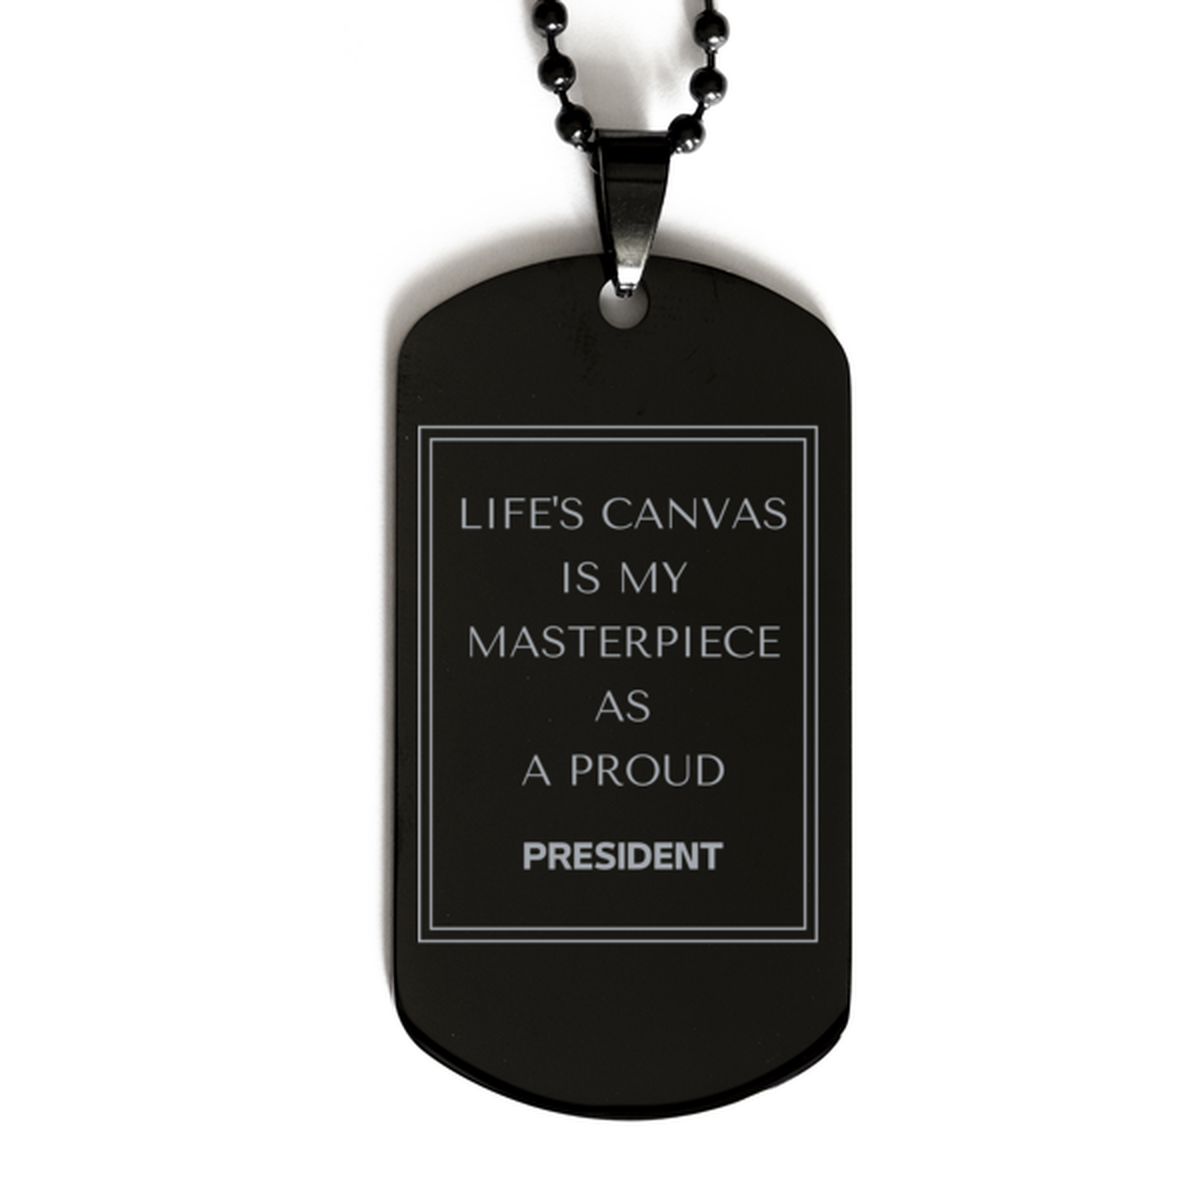 Proud President Gifts, Life's canvas is my masterpiece, Epic Birthday Christmas Unique Black Dog Tag For President, Coworkers, Men, Women, Friends